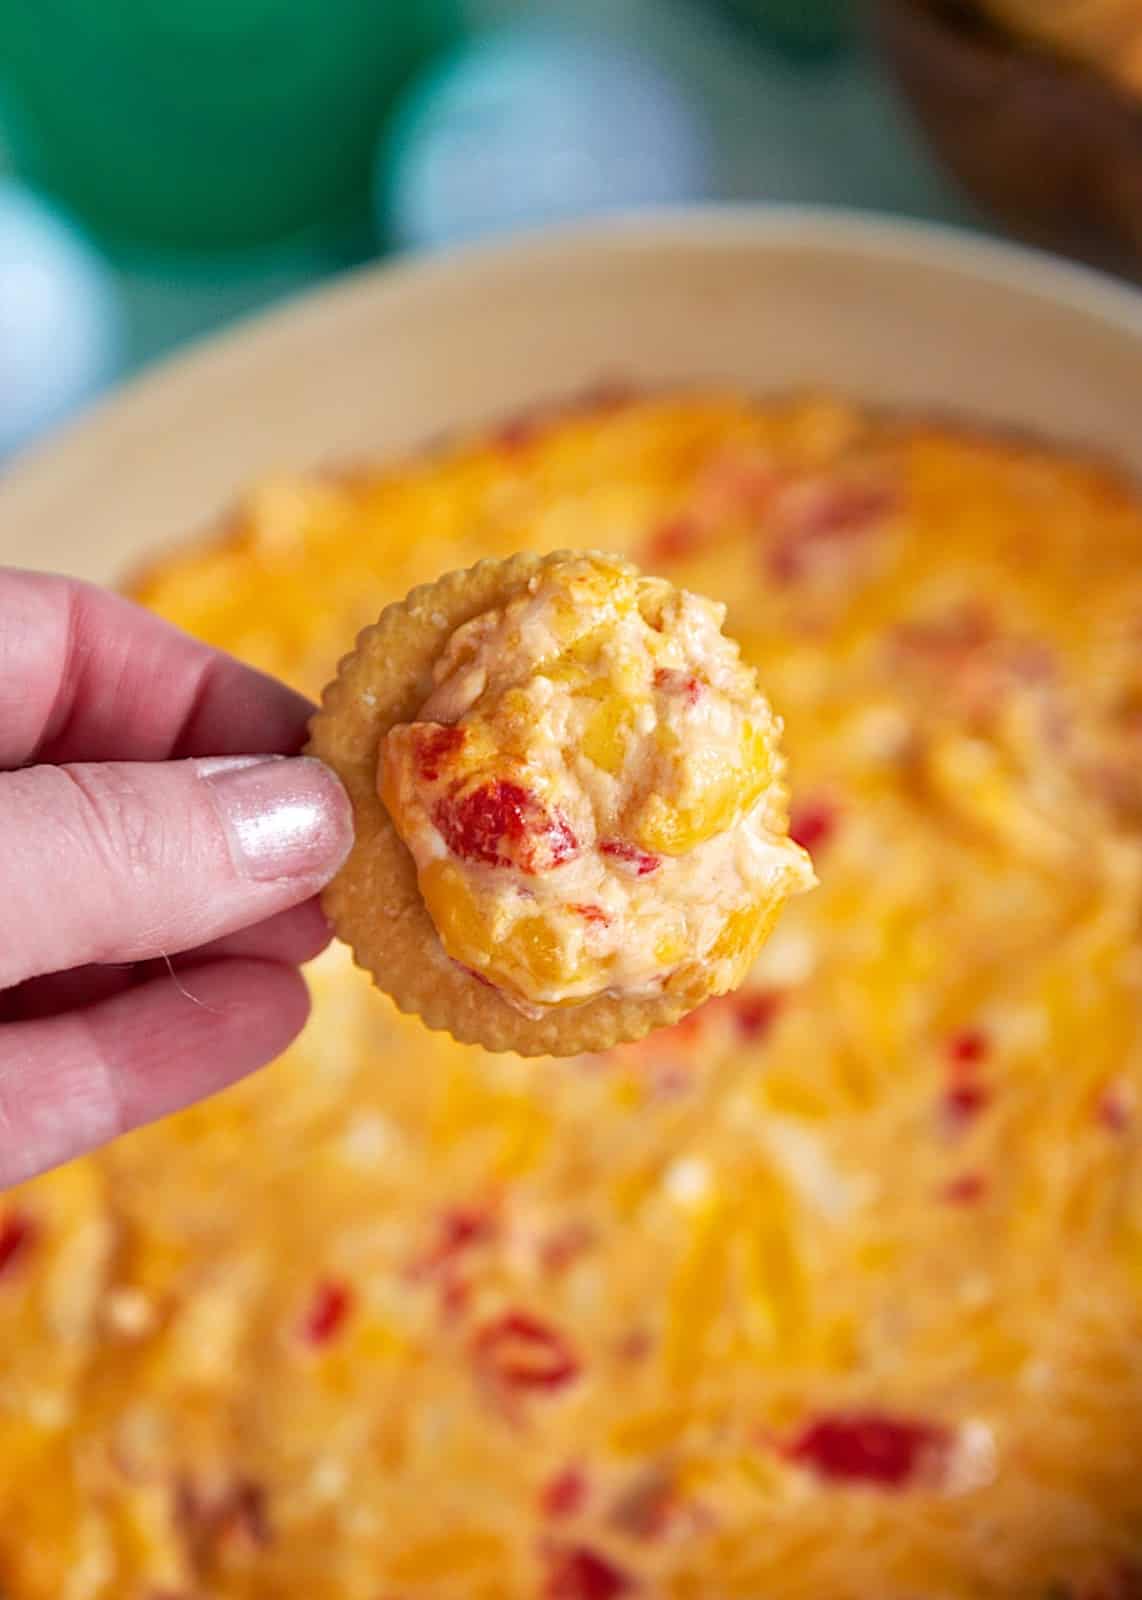 Baked Pimento Cheese Dip Recipe - perfect for The Masters. Cheddar, Parmesan, Roasted Red Peppers, Cream Cheese baked into an ooey, gooey cheesy dip. Great with Ritz cracker, celery or Fritos.